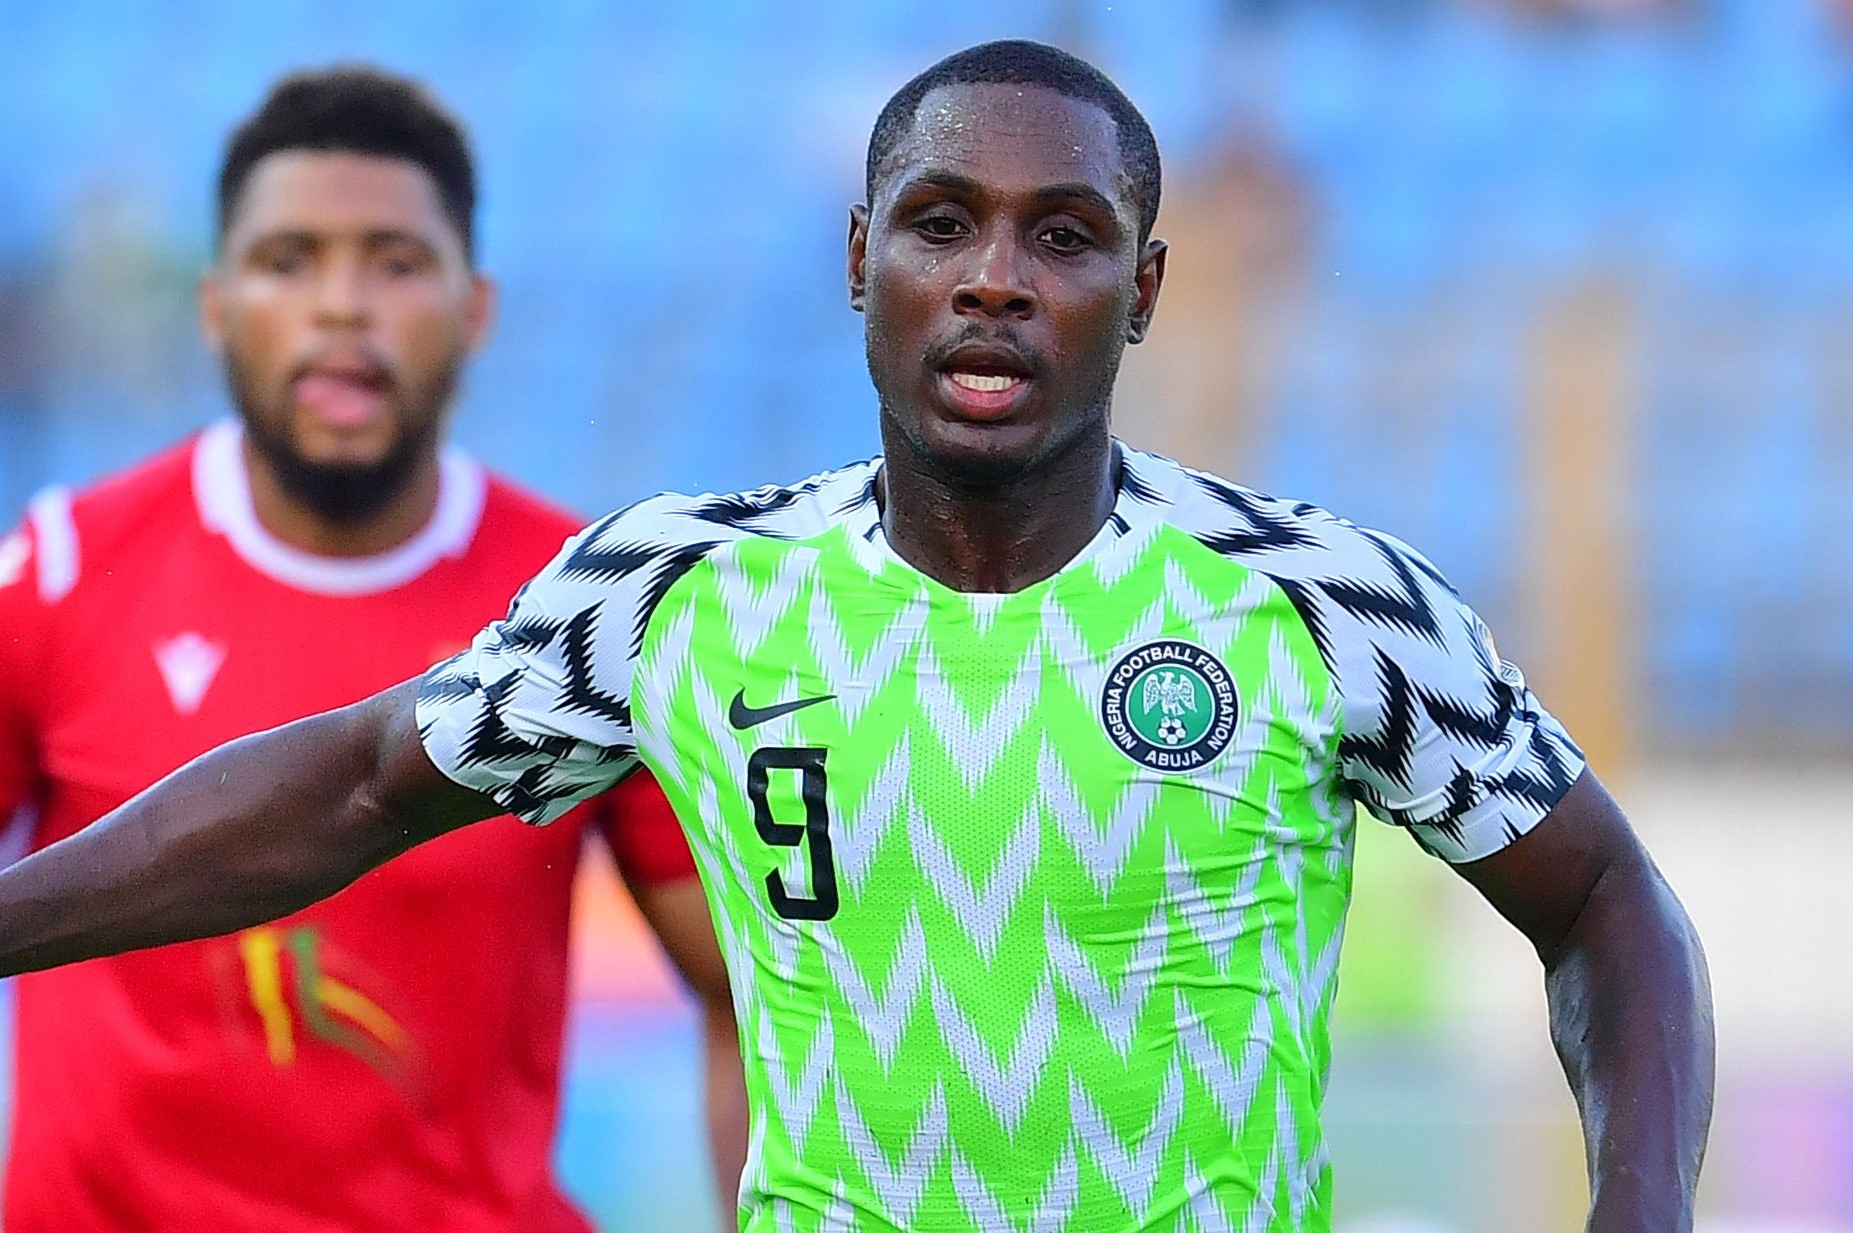 Which English club did Odion Ighalo NOT play for?